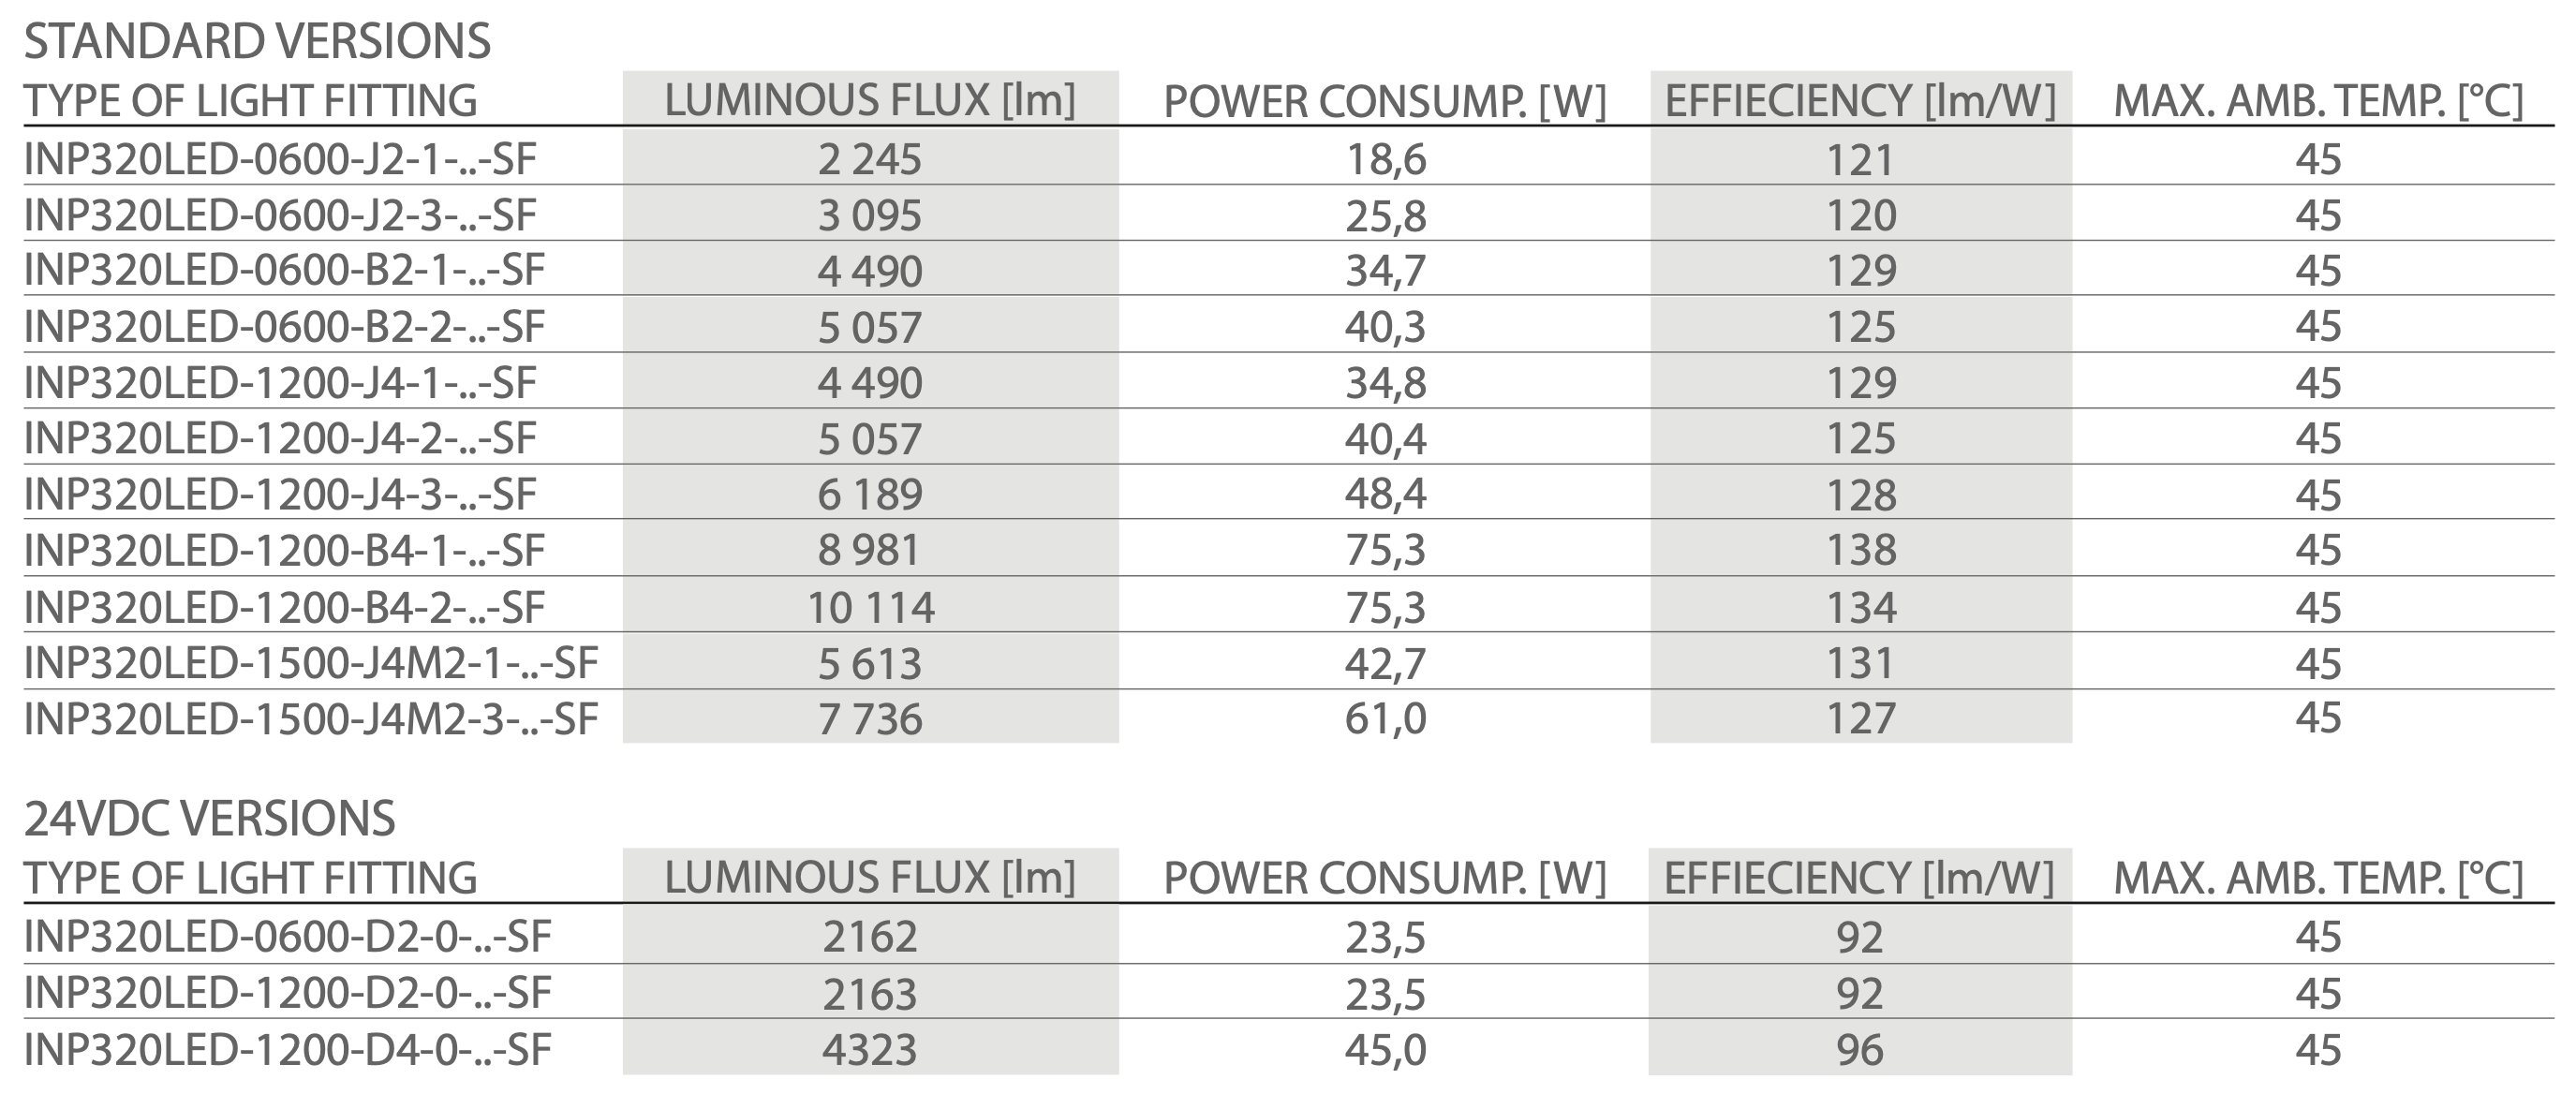 INP320LED SF types comparsion